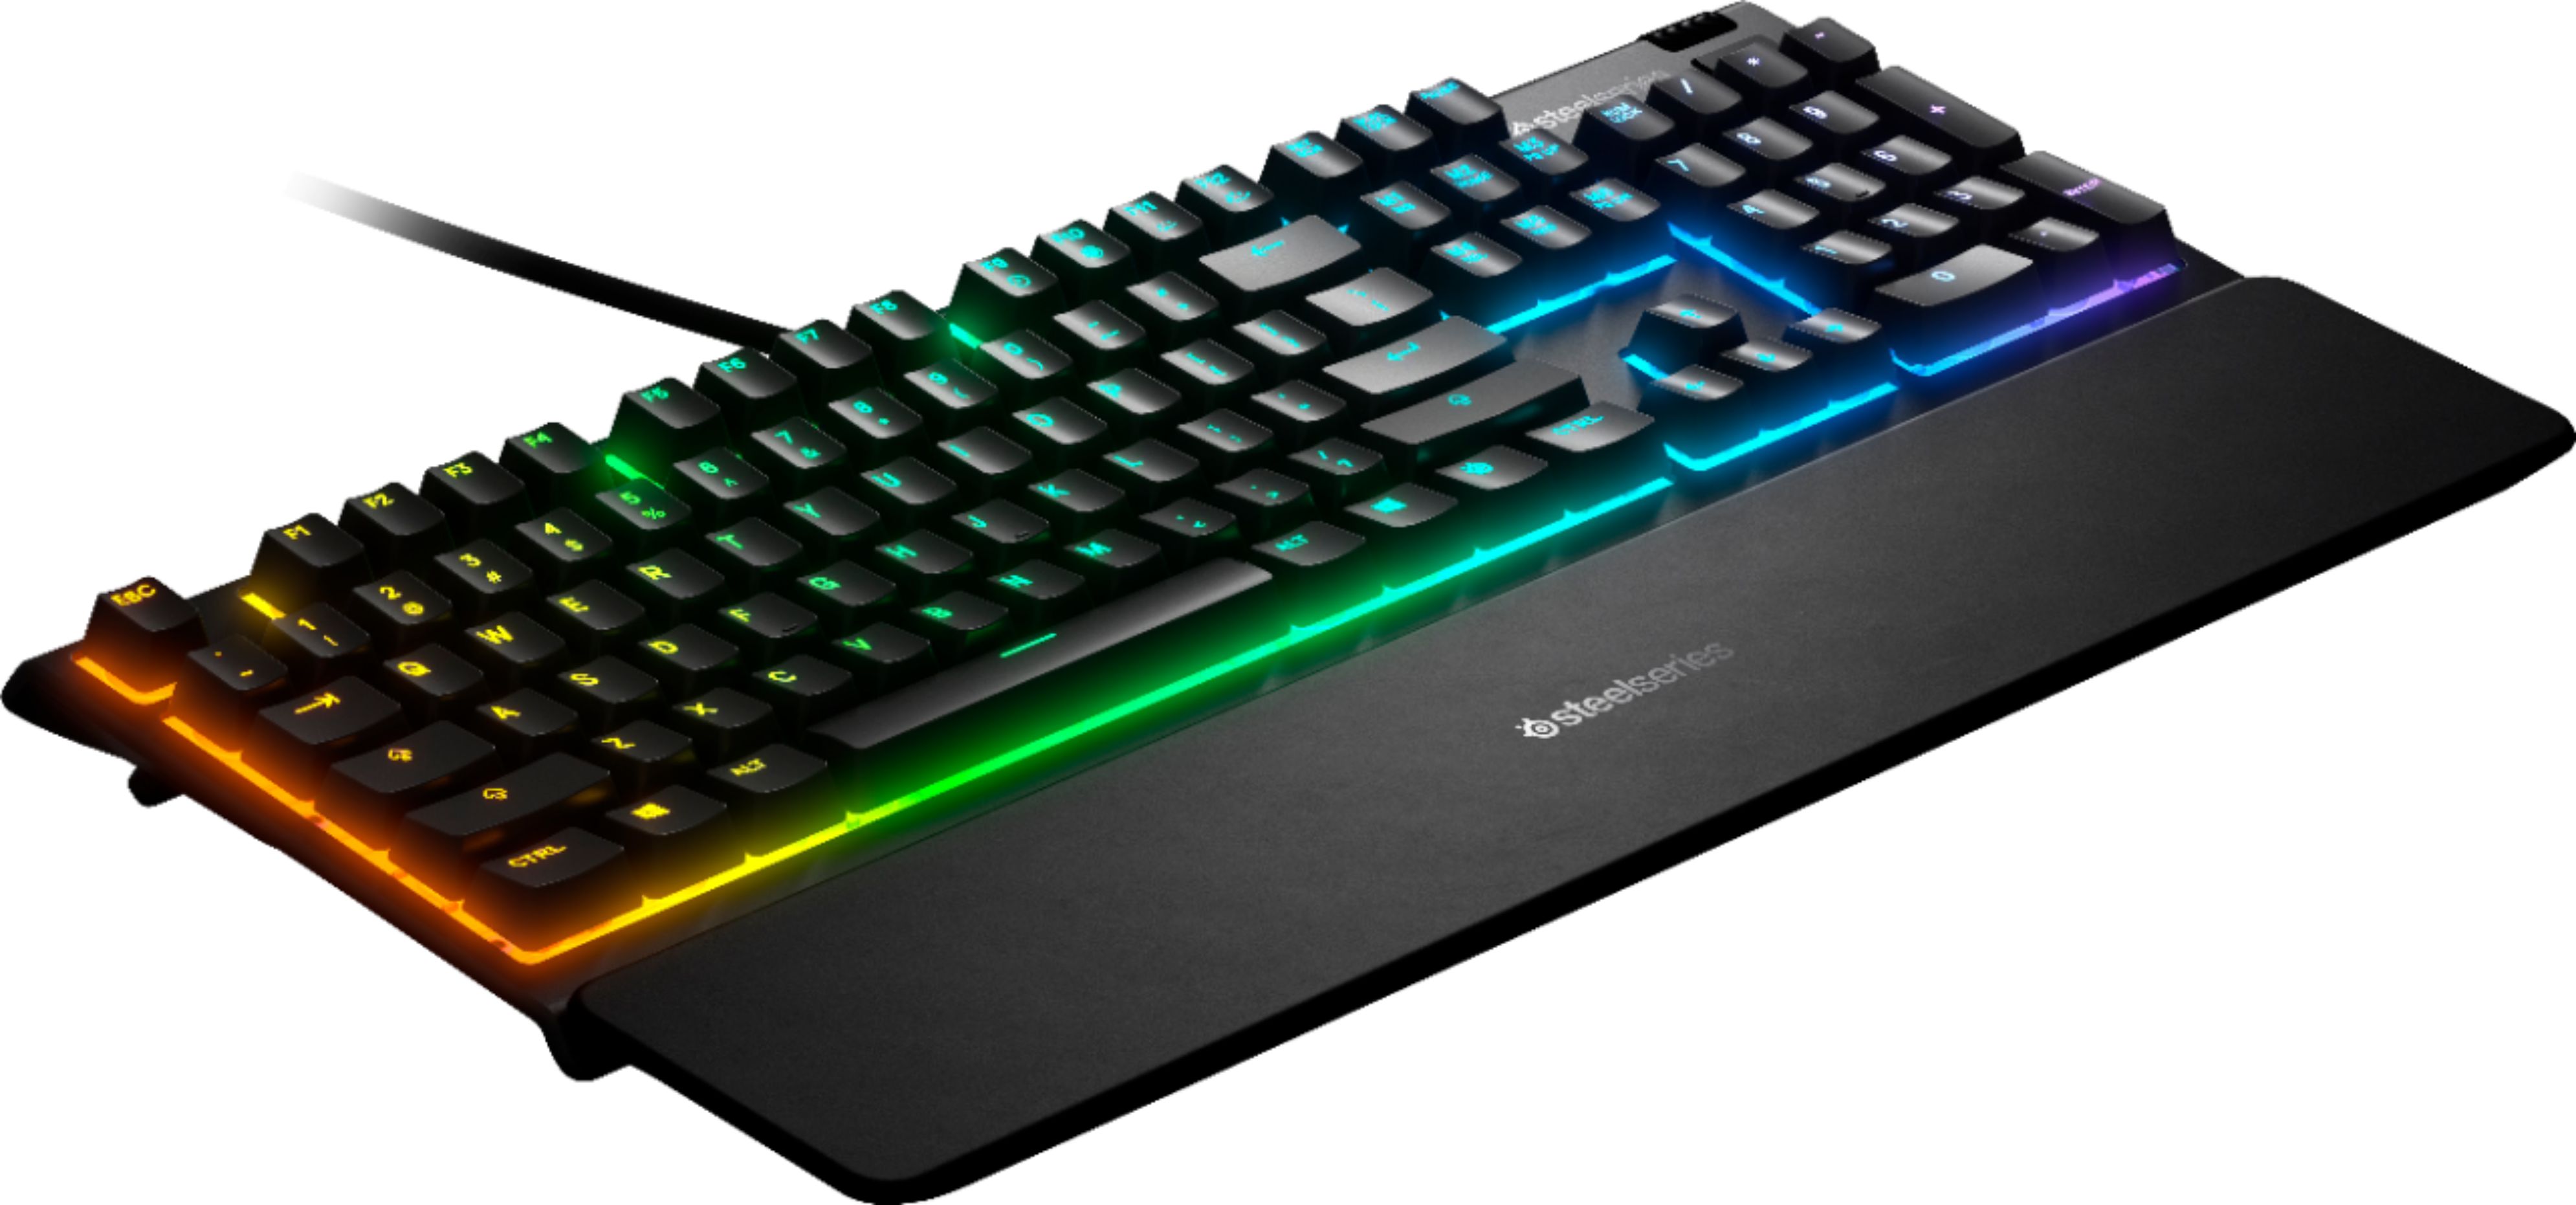 Steelseries Apex 3 Wired Gaming Whisper Quiet Switch Keyboard With 10 Zone Rgb Backlighting Black Best Buy